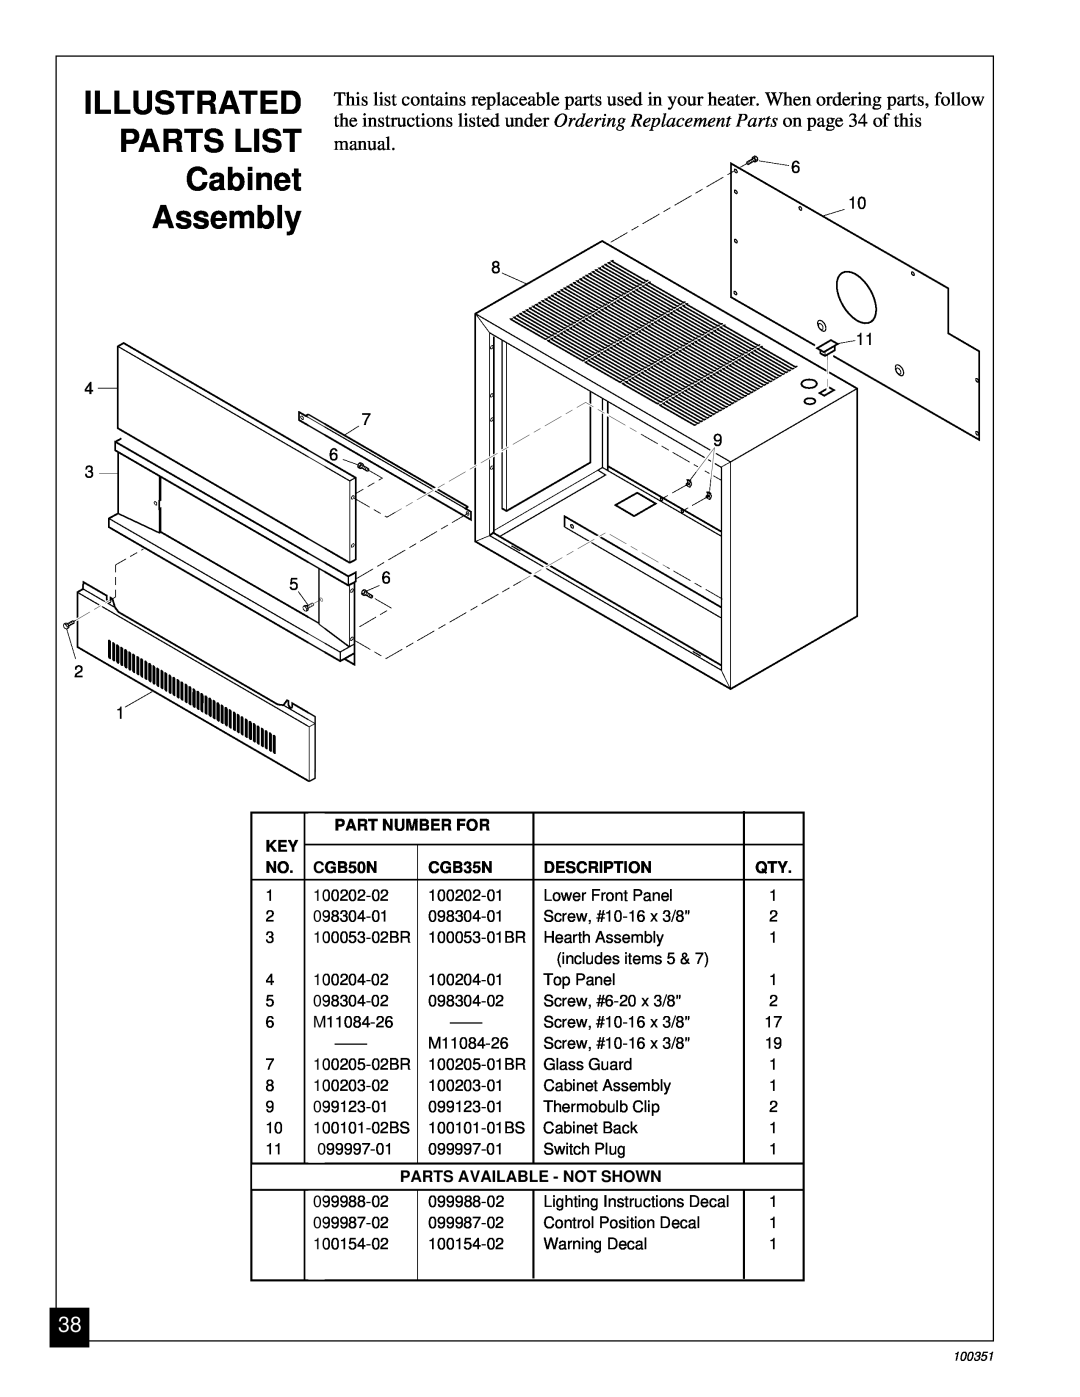 Desa CGB35N ILLUSTRATED PARTS LIST Cabinet Assembly, Part Number For, CGB50N, Description, Parts Available - Not Shown 